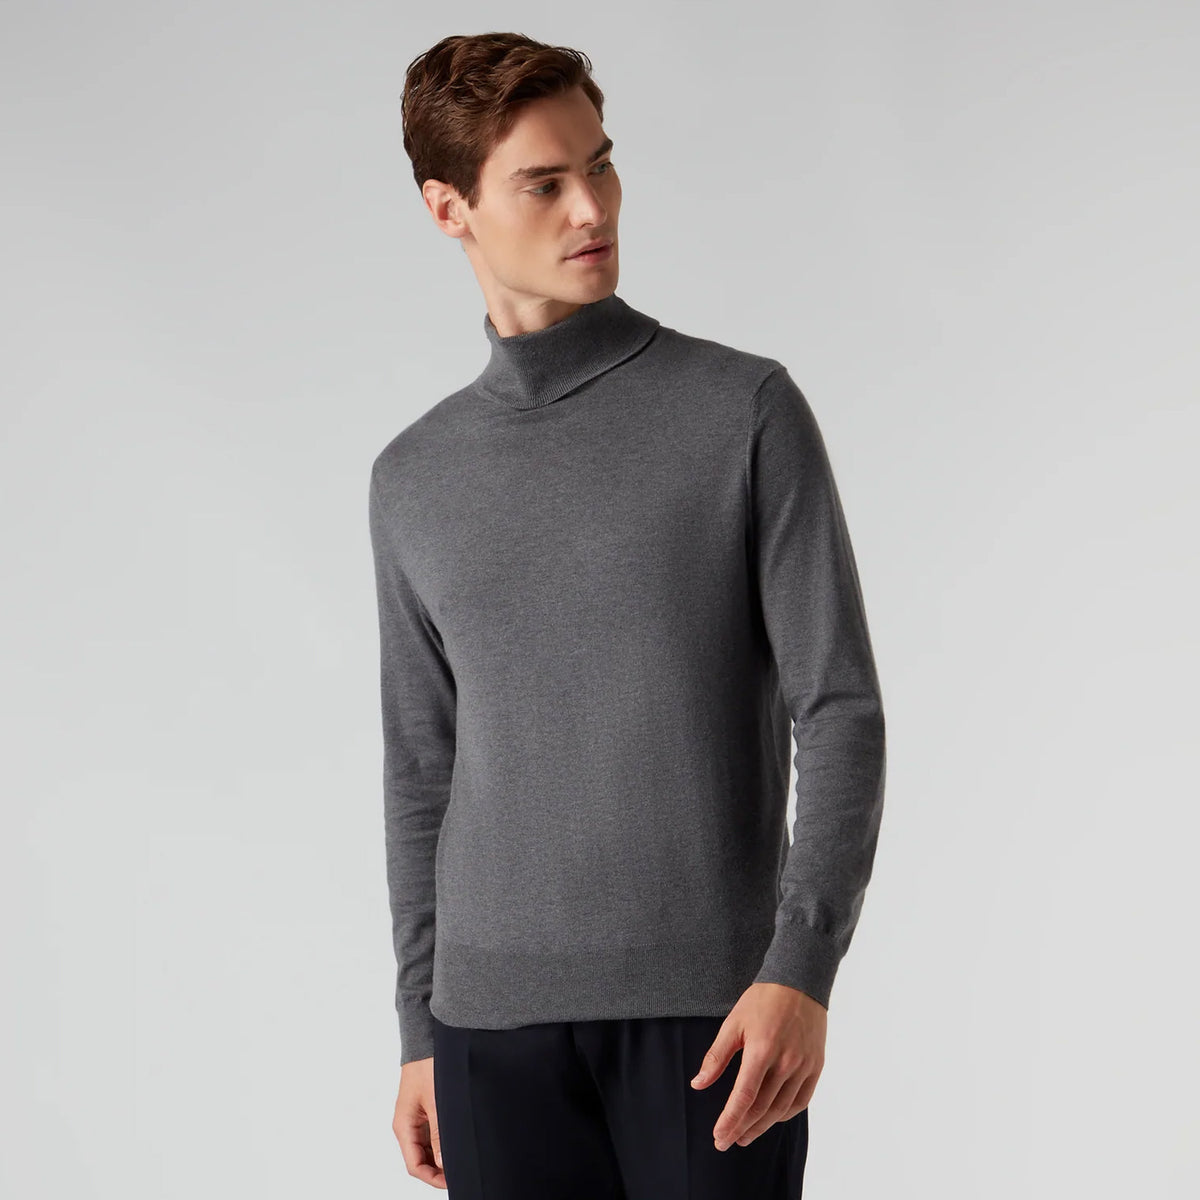 James Bond Roll Neck Sweater - You Only Live Twice Edition - By N. Peal